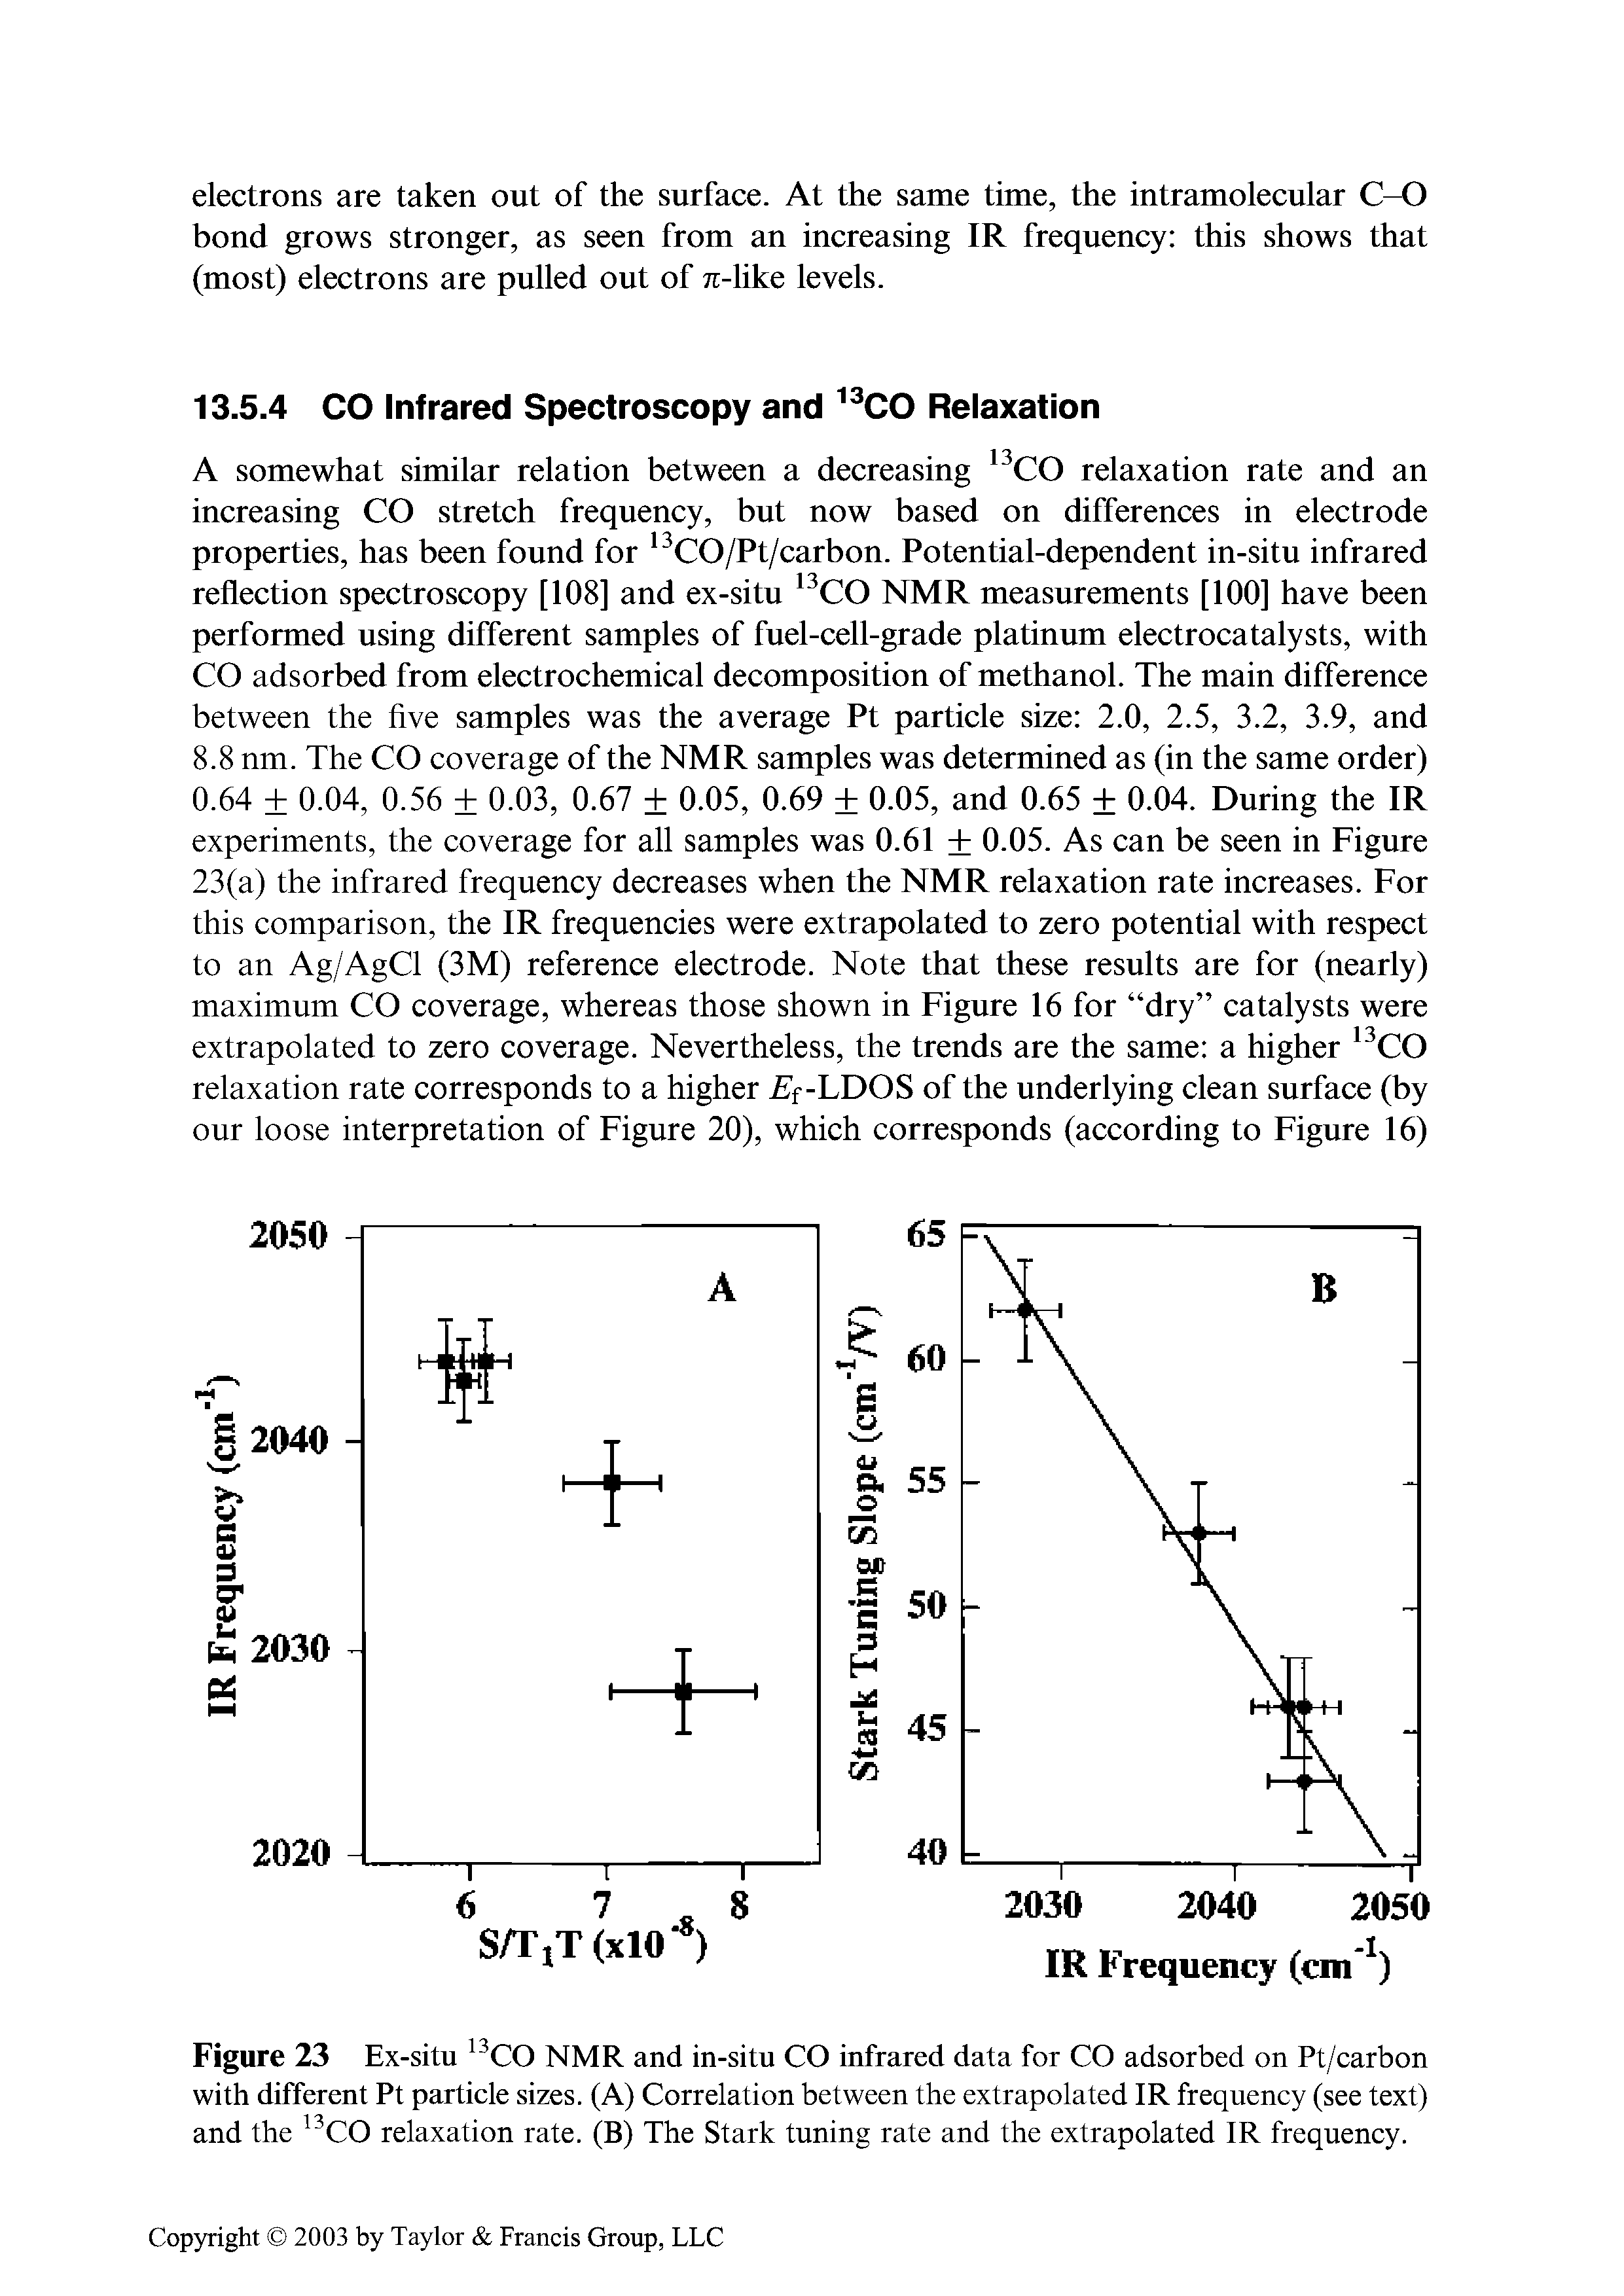 Figure 23 Ex-situ NMR and in-situ CO infrared data for CO adsorbed on Pt/carbon with different Pt particle sizes. (A) Correlation between the extrapolated IR frequency (see text)...